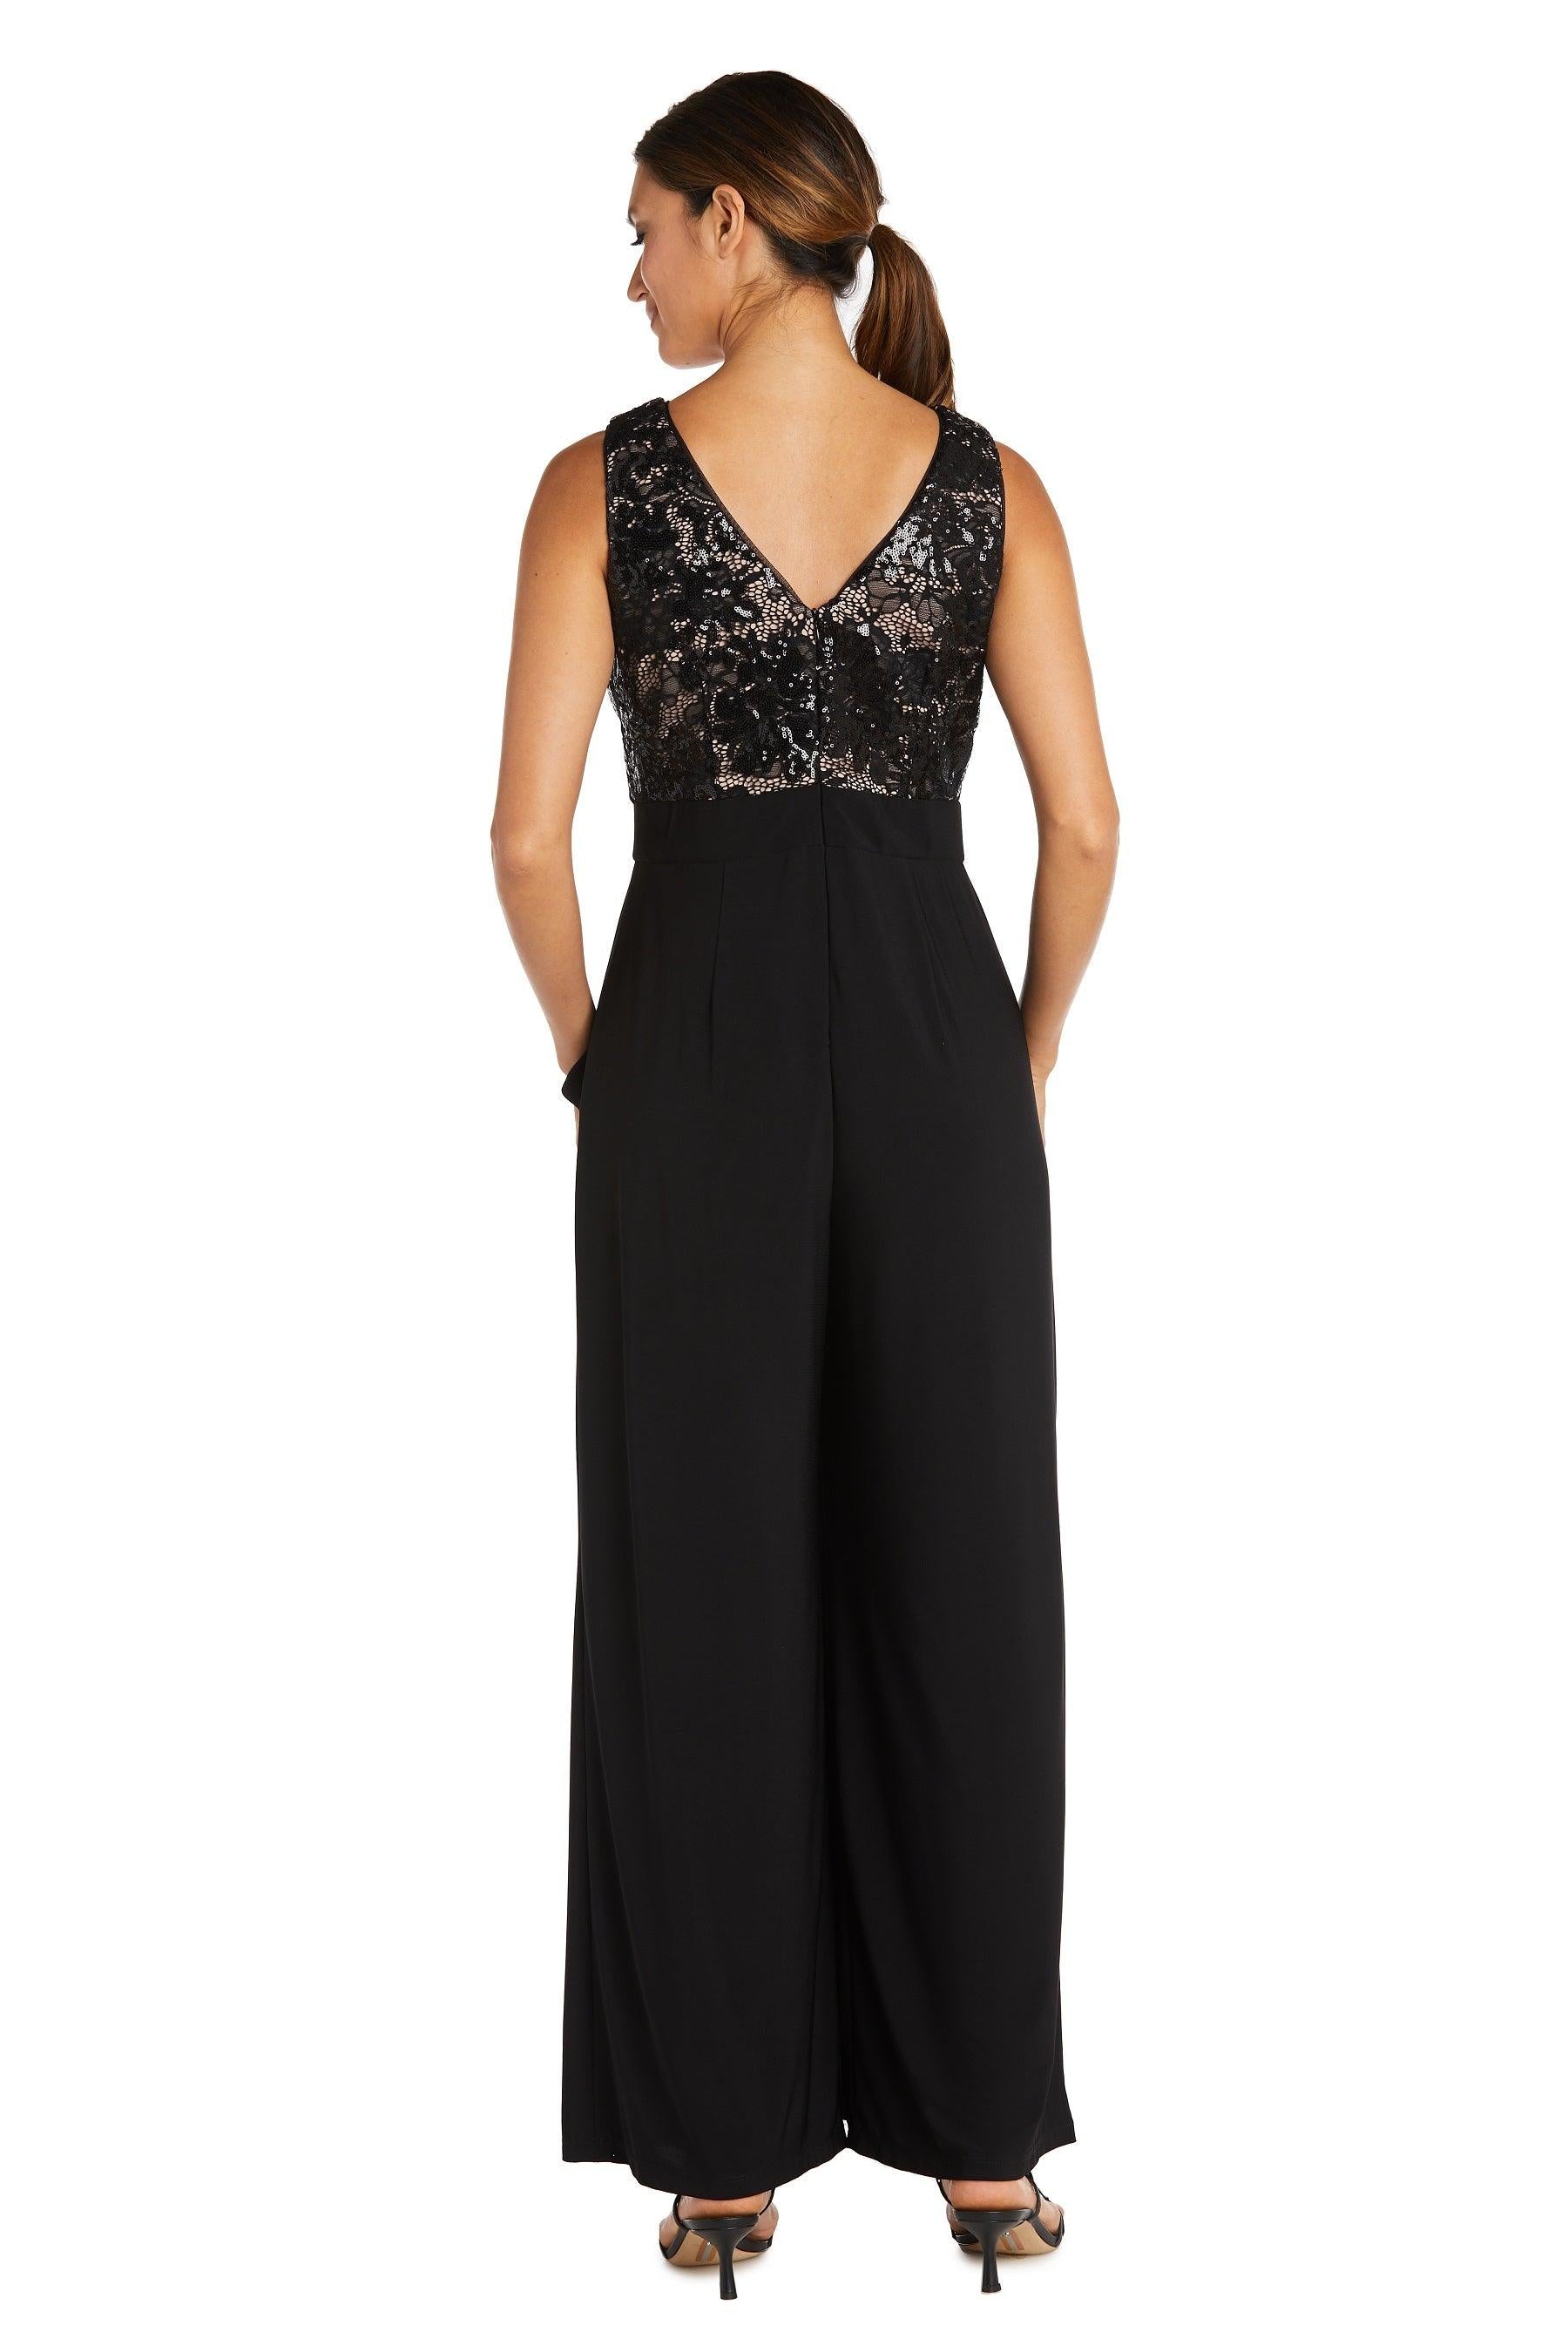 R&M Richards Formal Sleeveless Petite Jumpsuit 9054P - The Dress Outlet